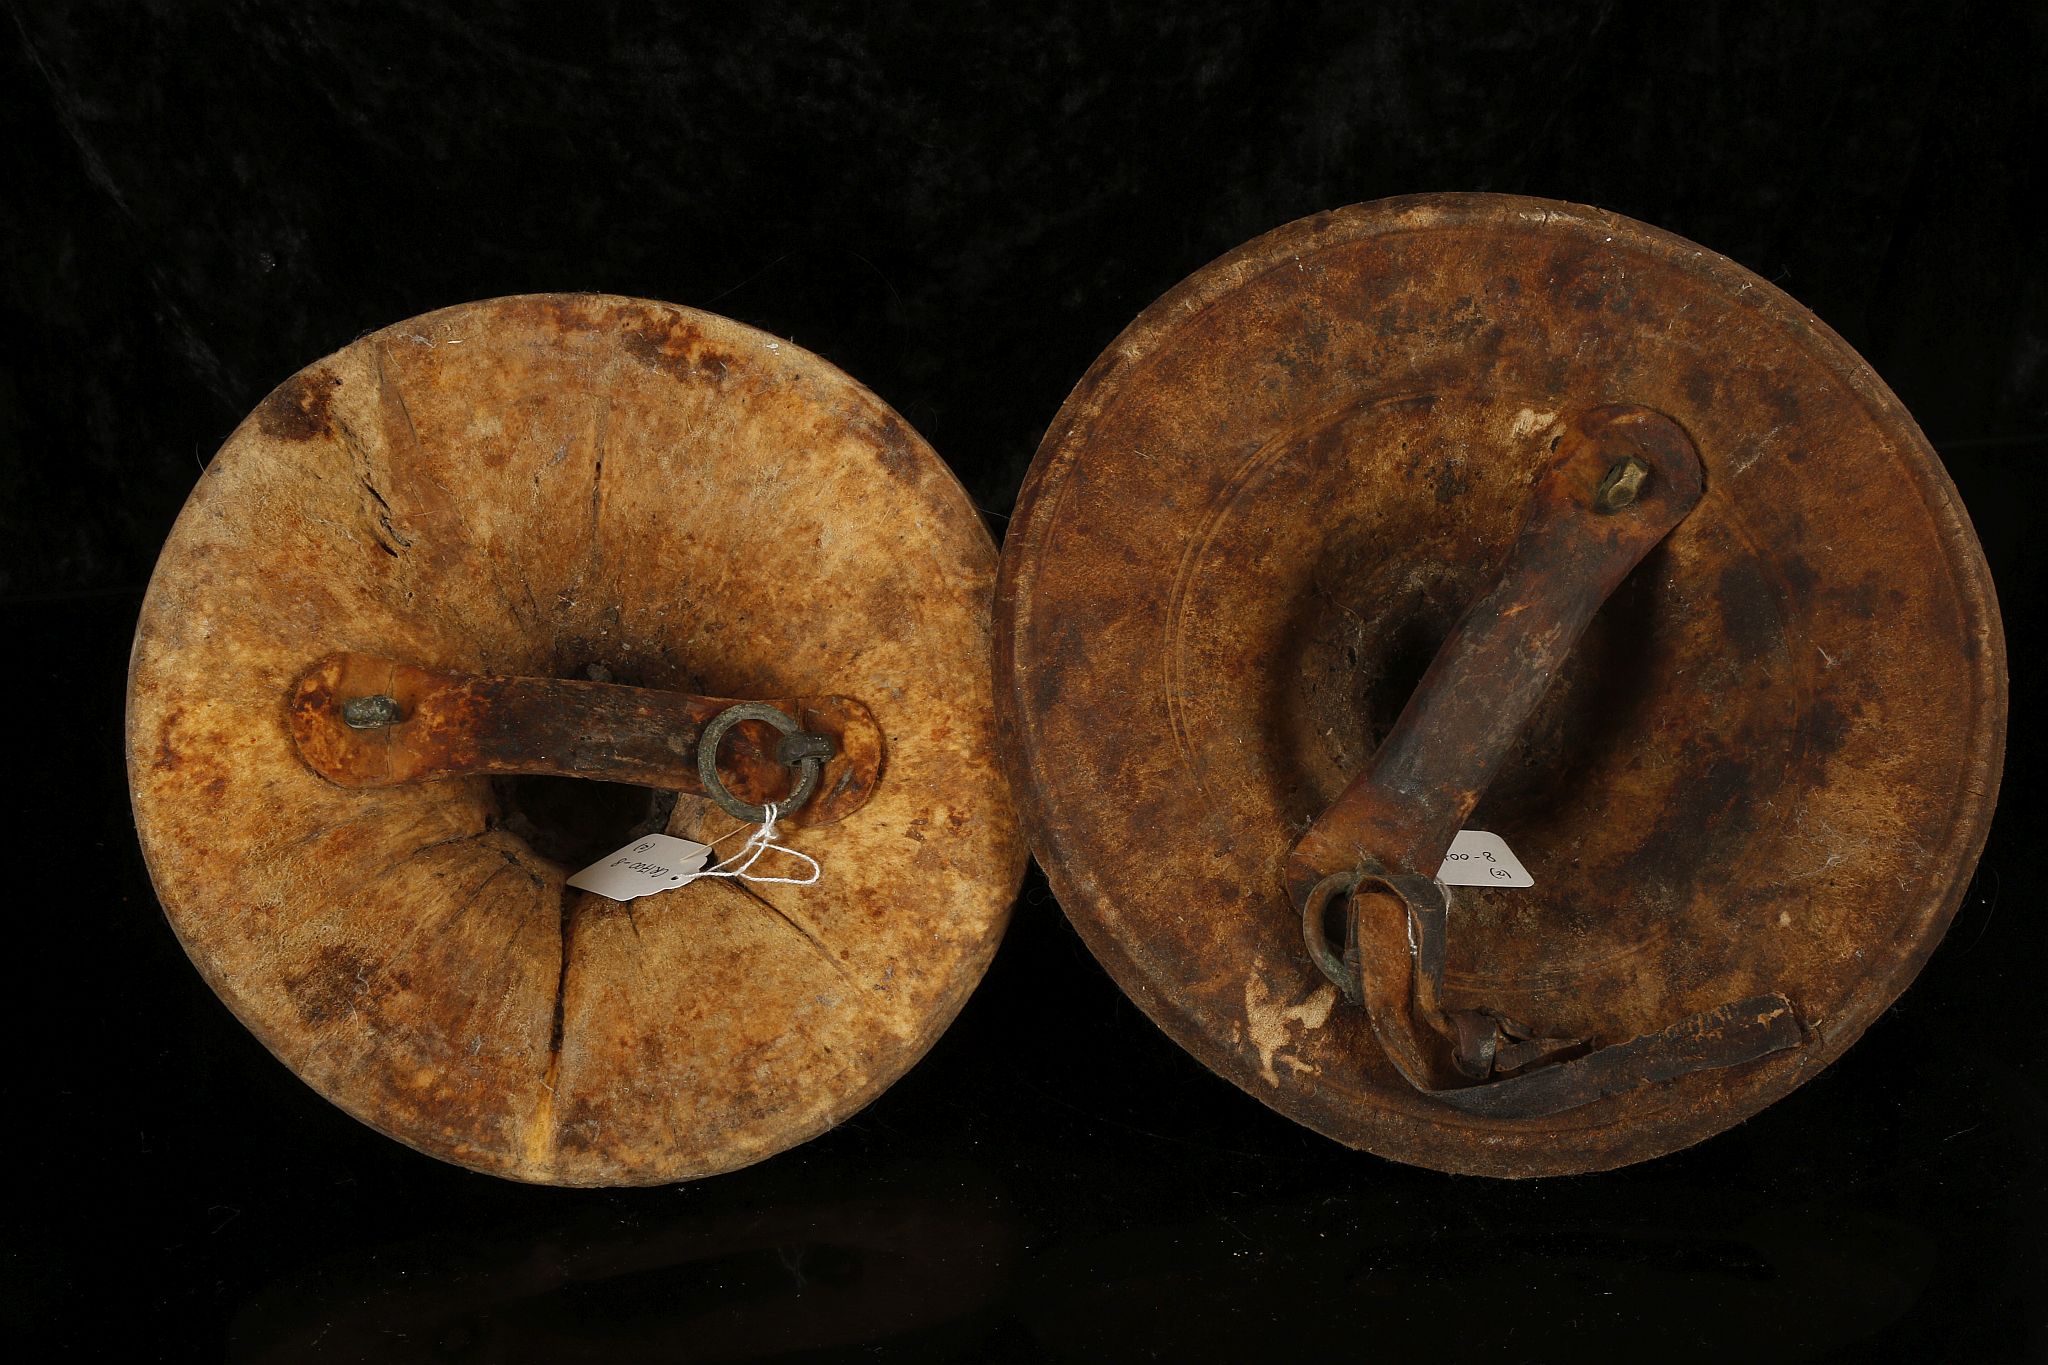 TWO HIDE SHIELDS, SULTANATE OF OMAN, SOMALIA AND EAST ETHIOPIA Decorated with ribs and applied metal - Image 6 of 6